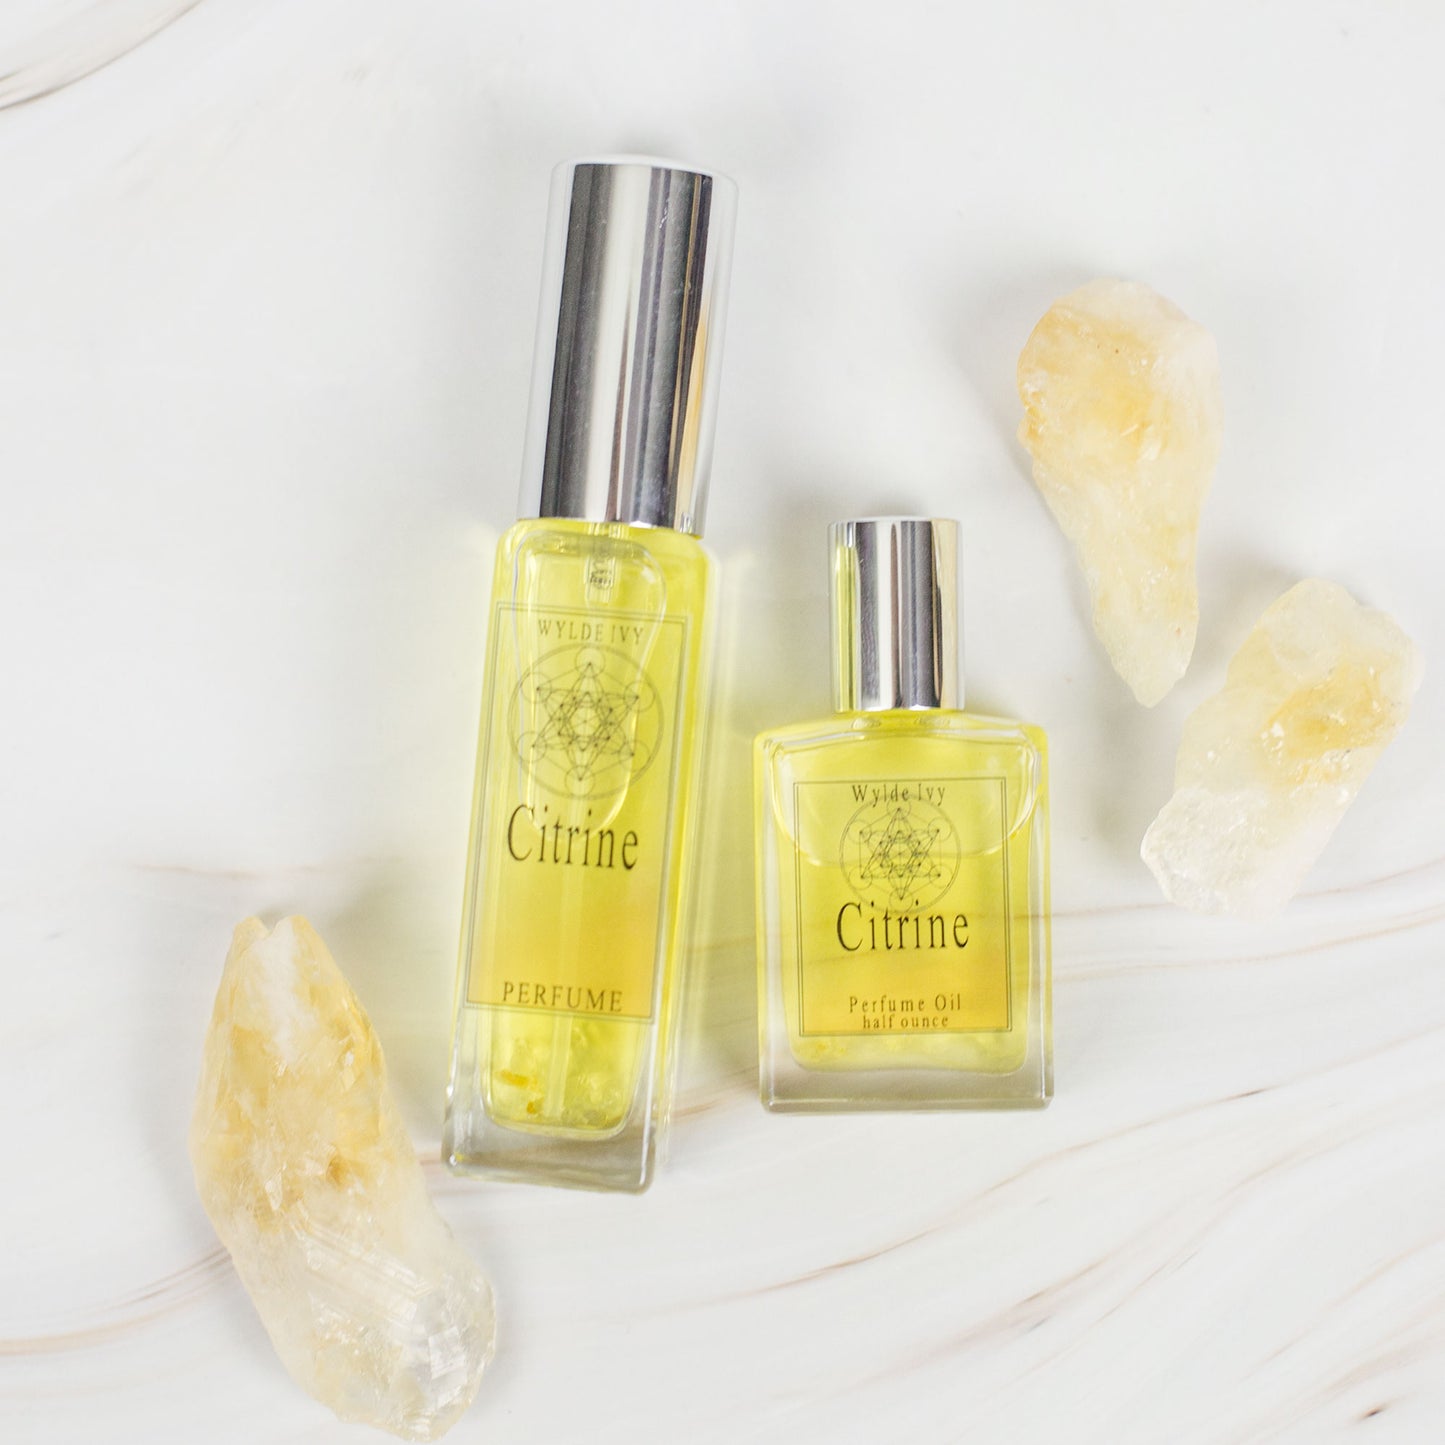 The Crystal Collection Perfume Oils